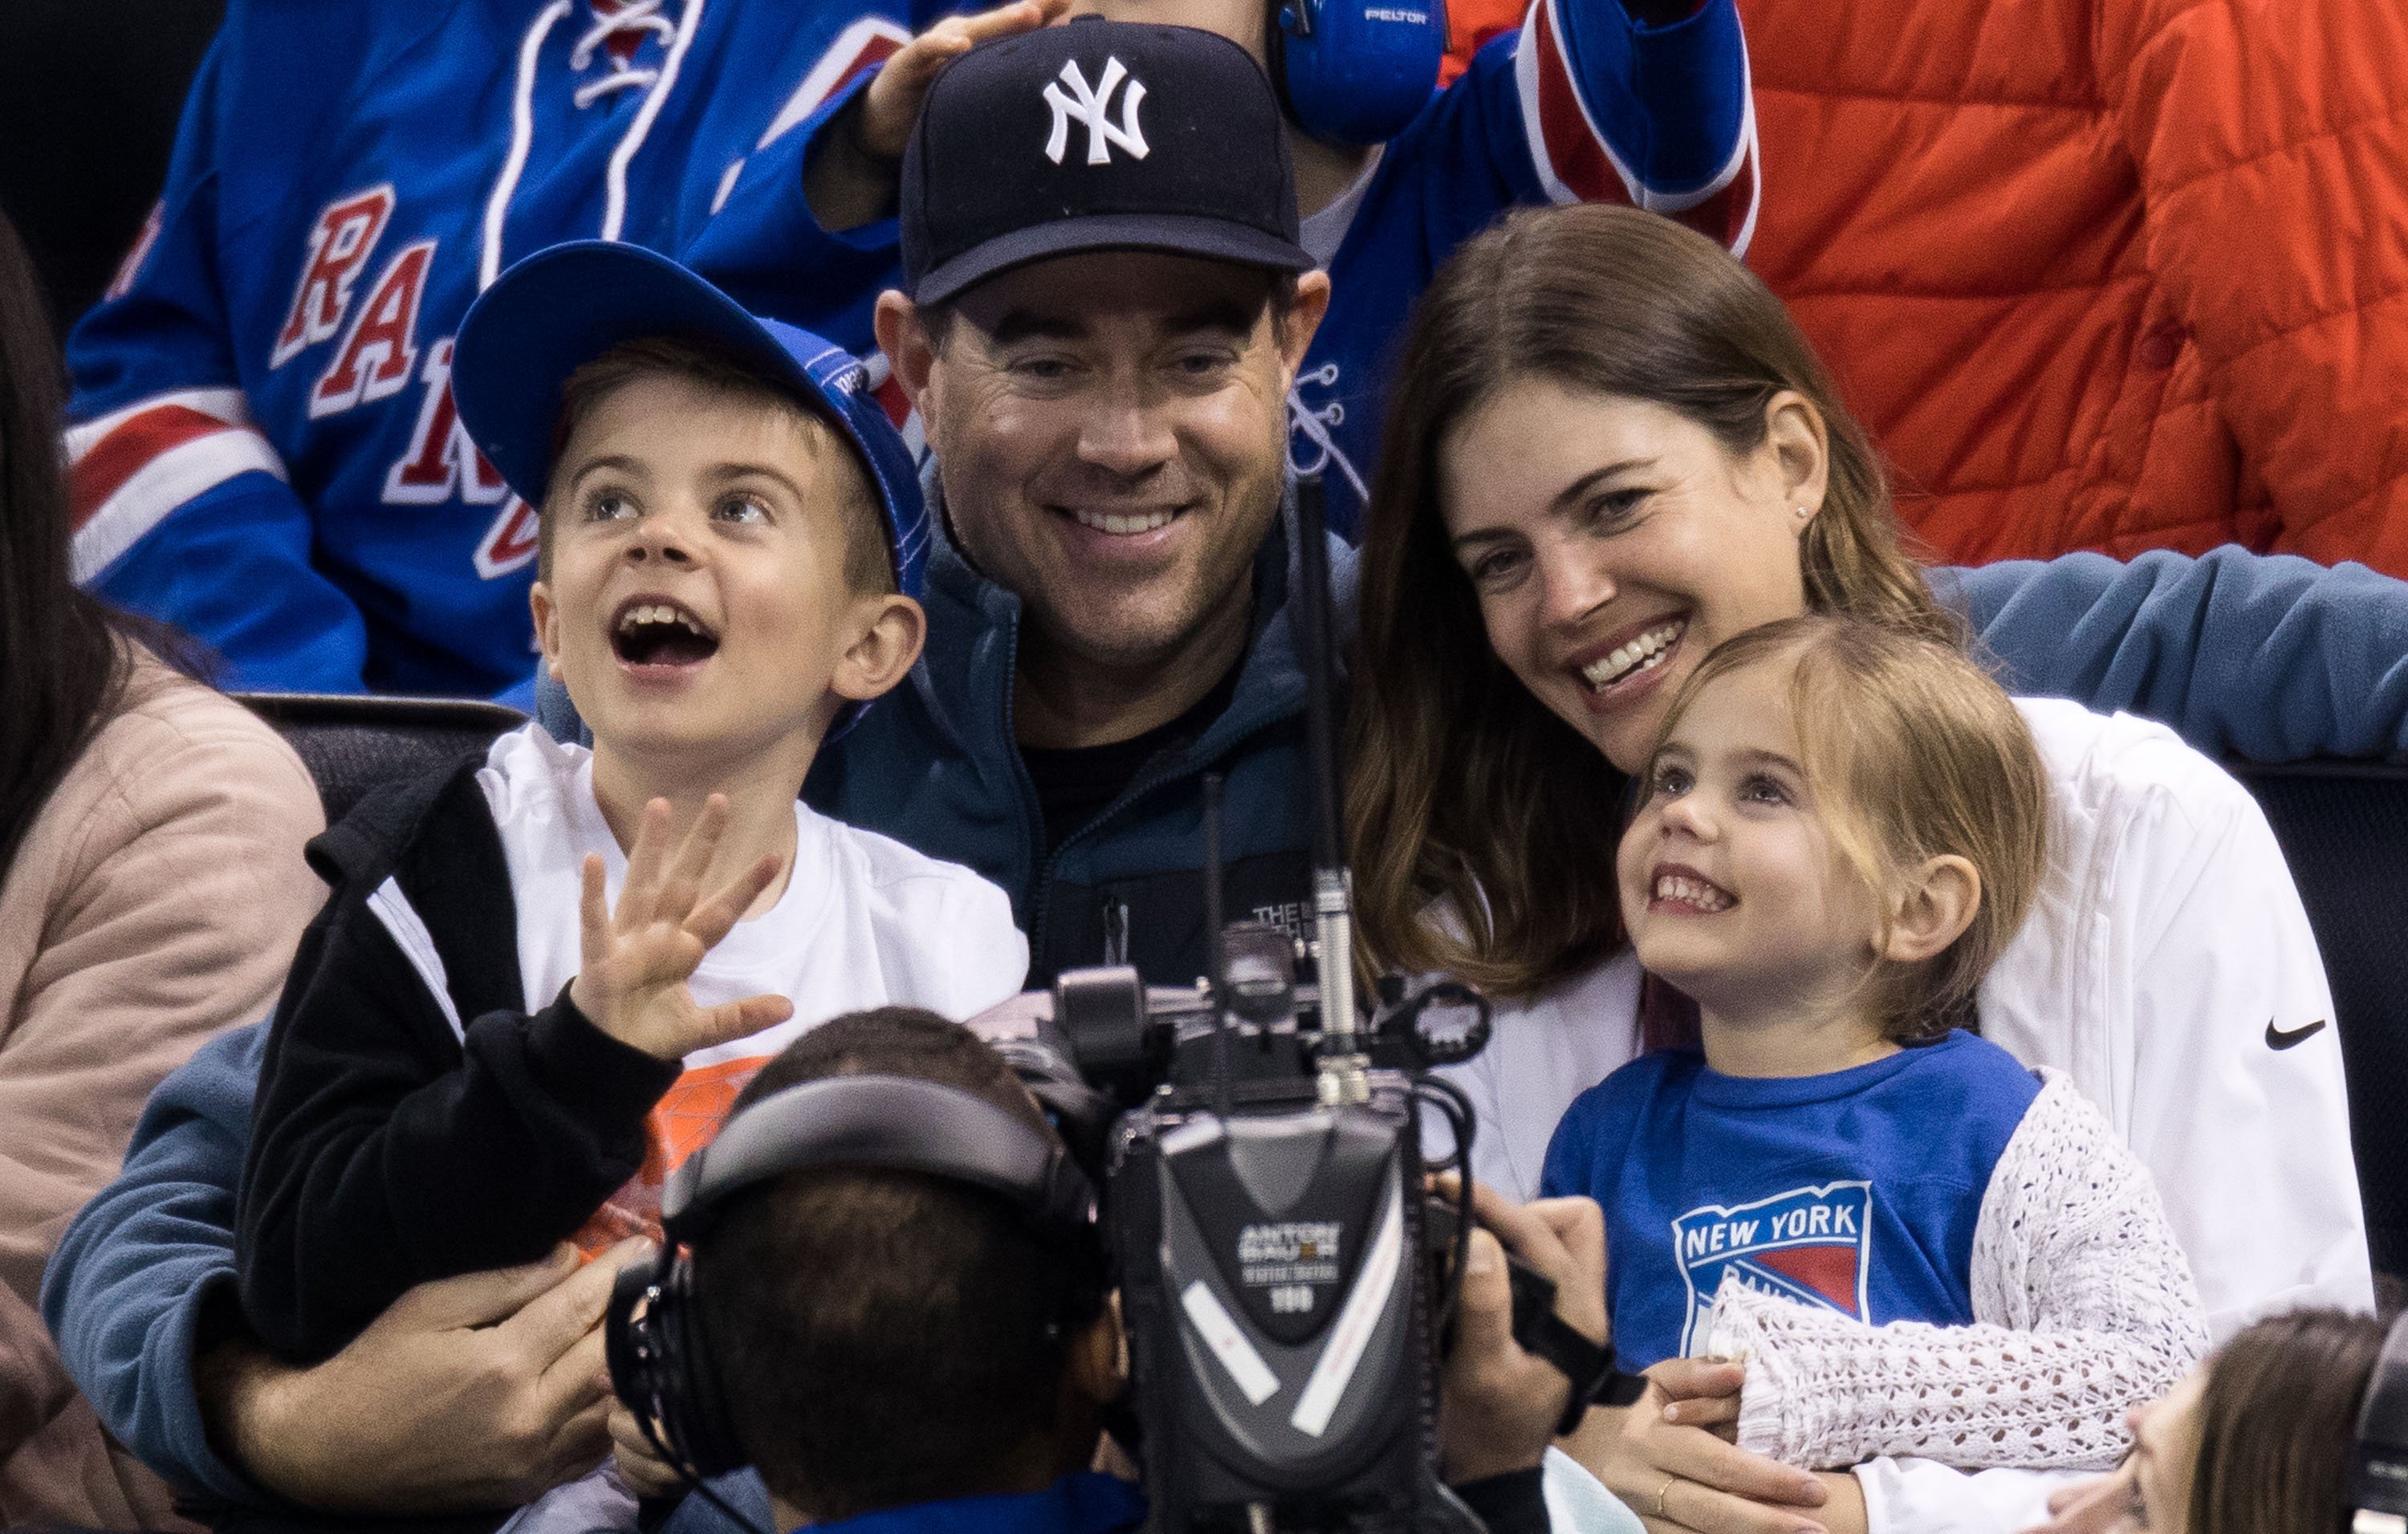 Carson Daly, Siri Pinter, Jackson Daly and Etta Daly attend Pittsburgh Penguins Vs. New York Rangers game at Madison Square Garden on March 31, 2017 in New York City | Source: Getty Images